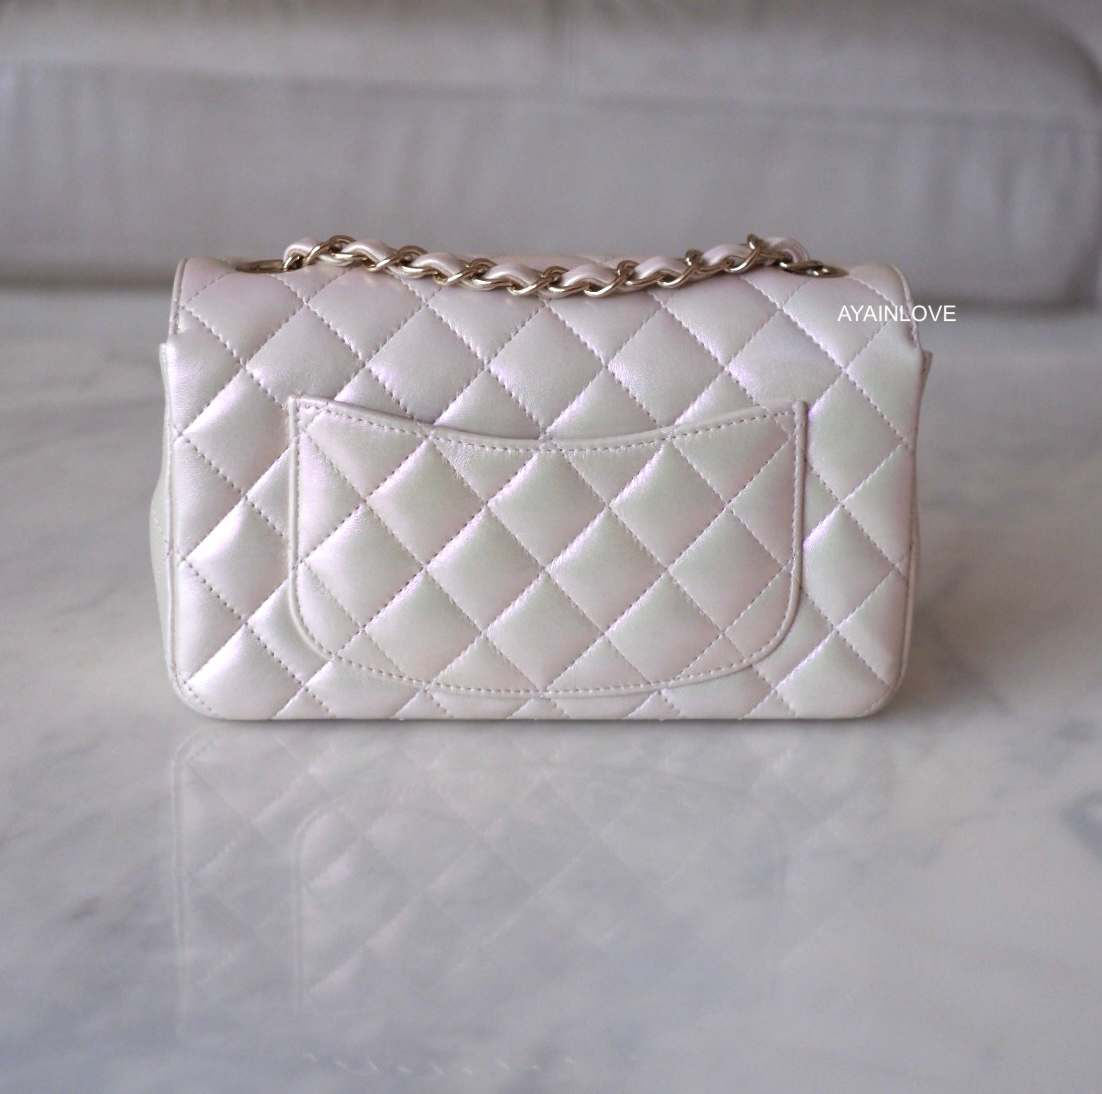 CHANEL 20B Iridescent Ivory Classic Flap Bag Lt Gold Hw *New - Timeless  Luxuries